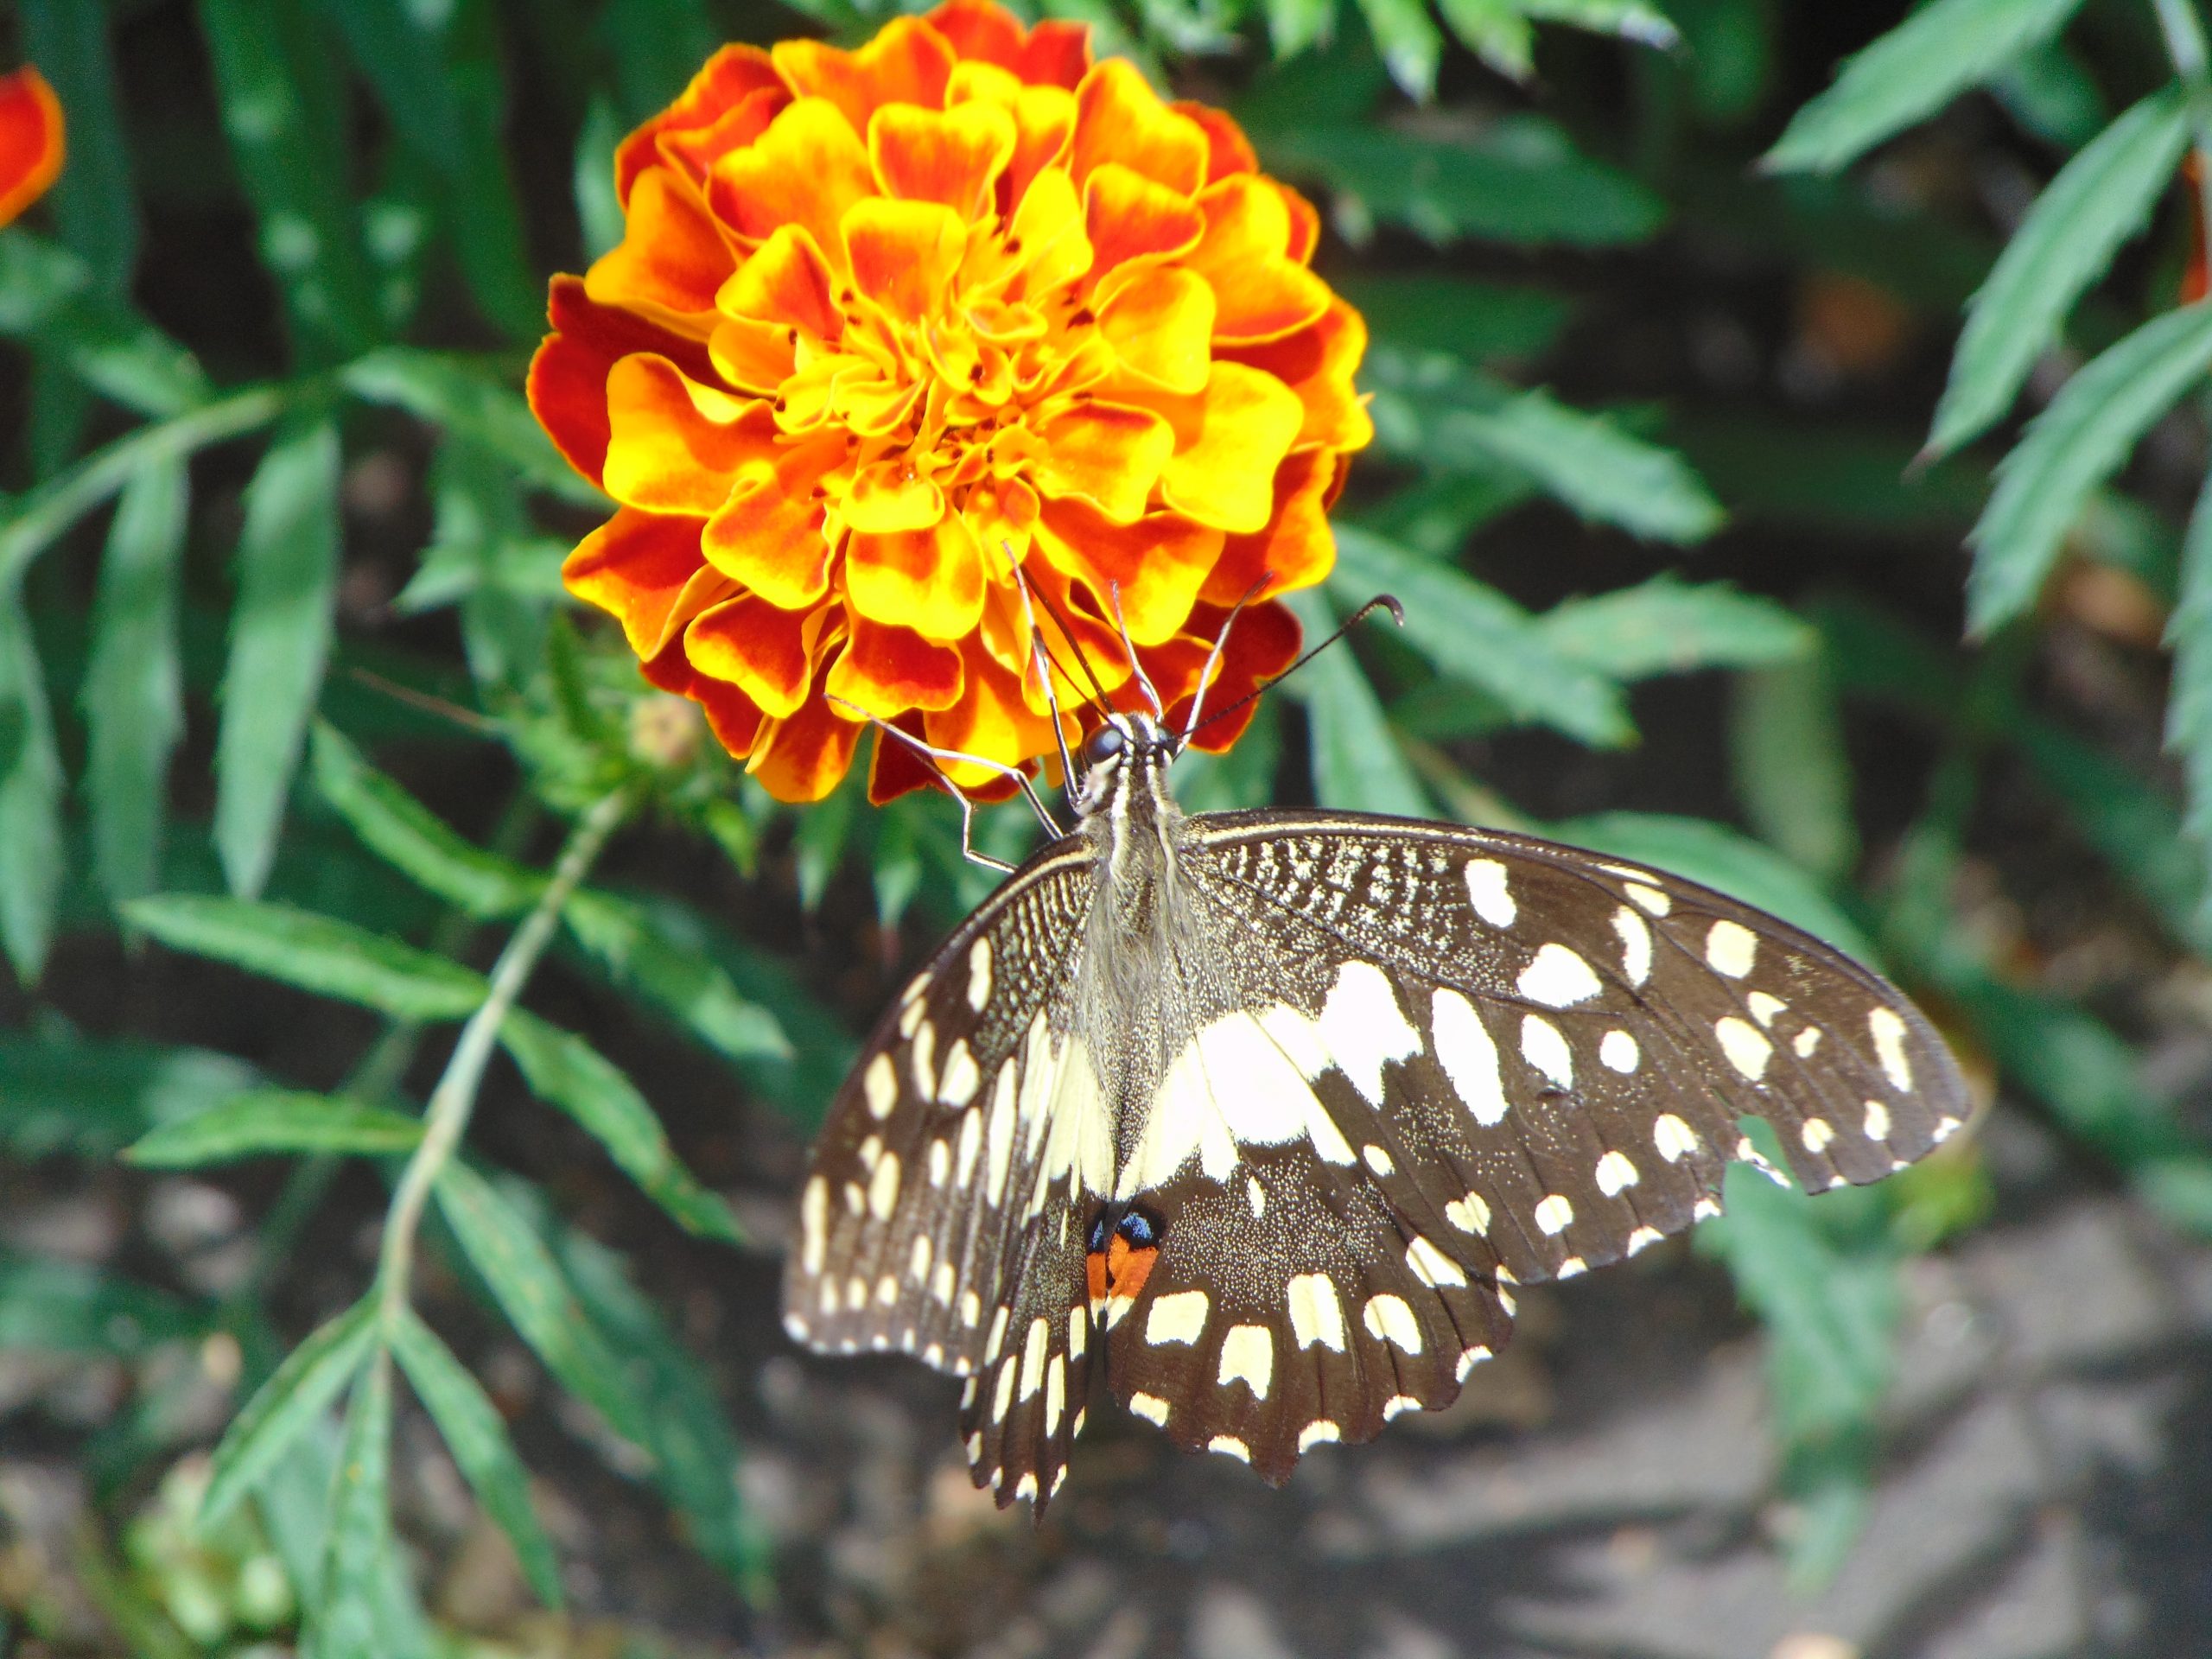 A butterfly sucking nectar from marigold flower.